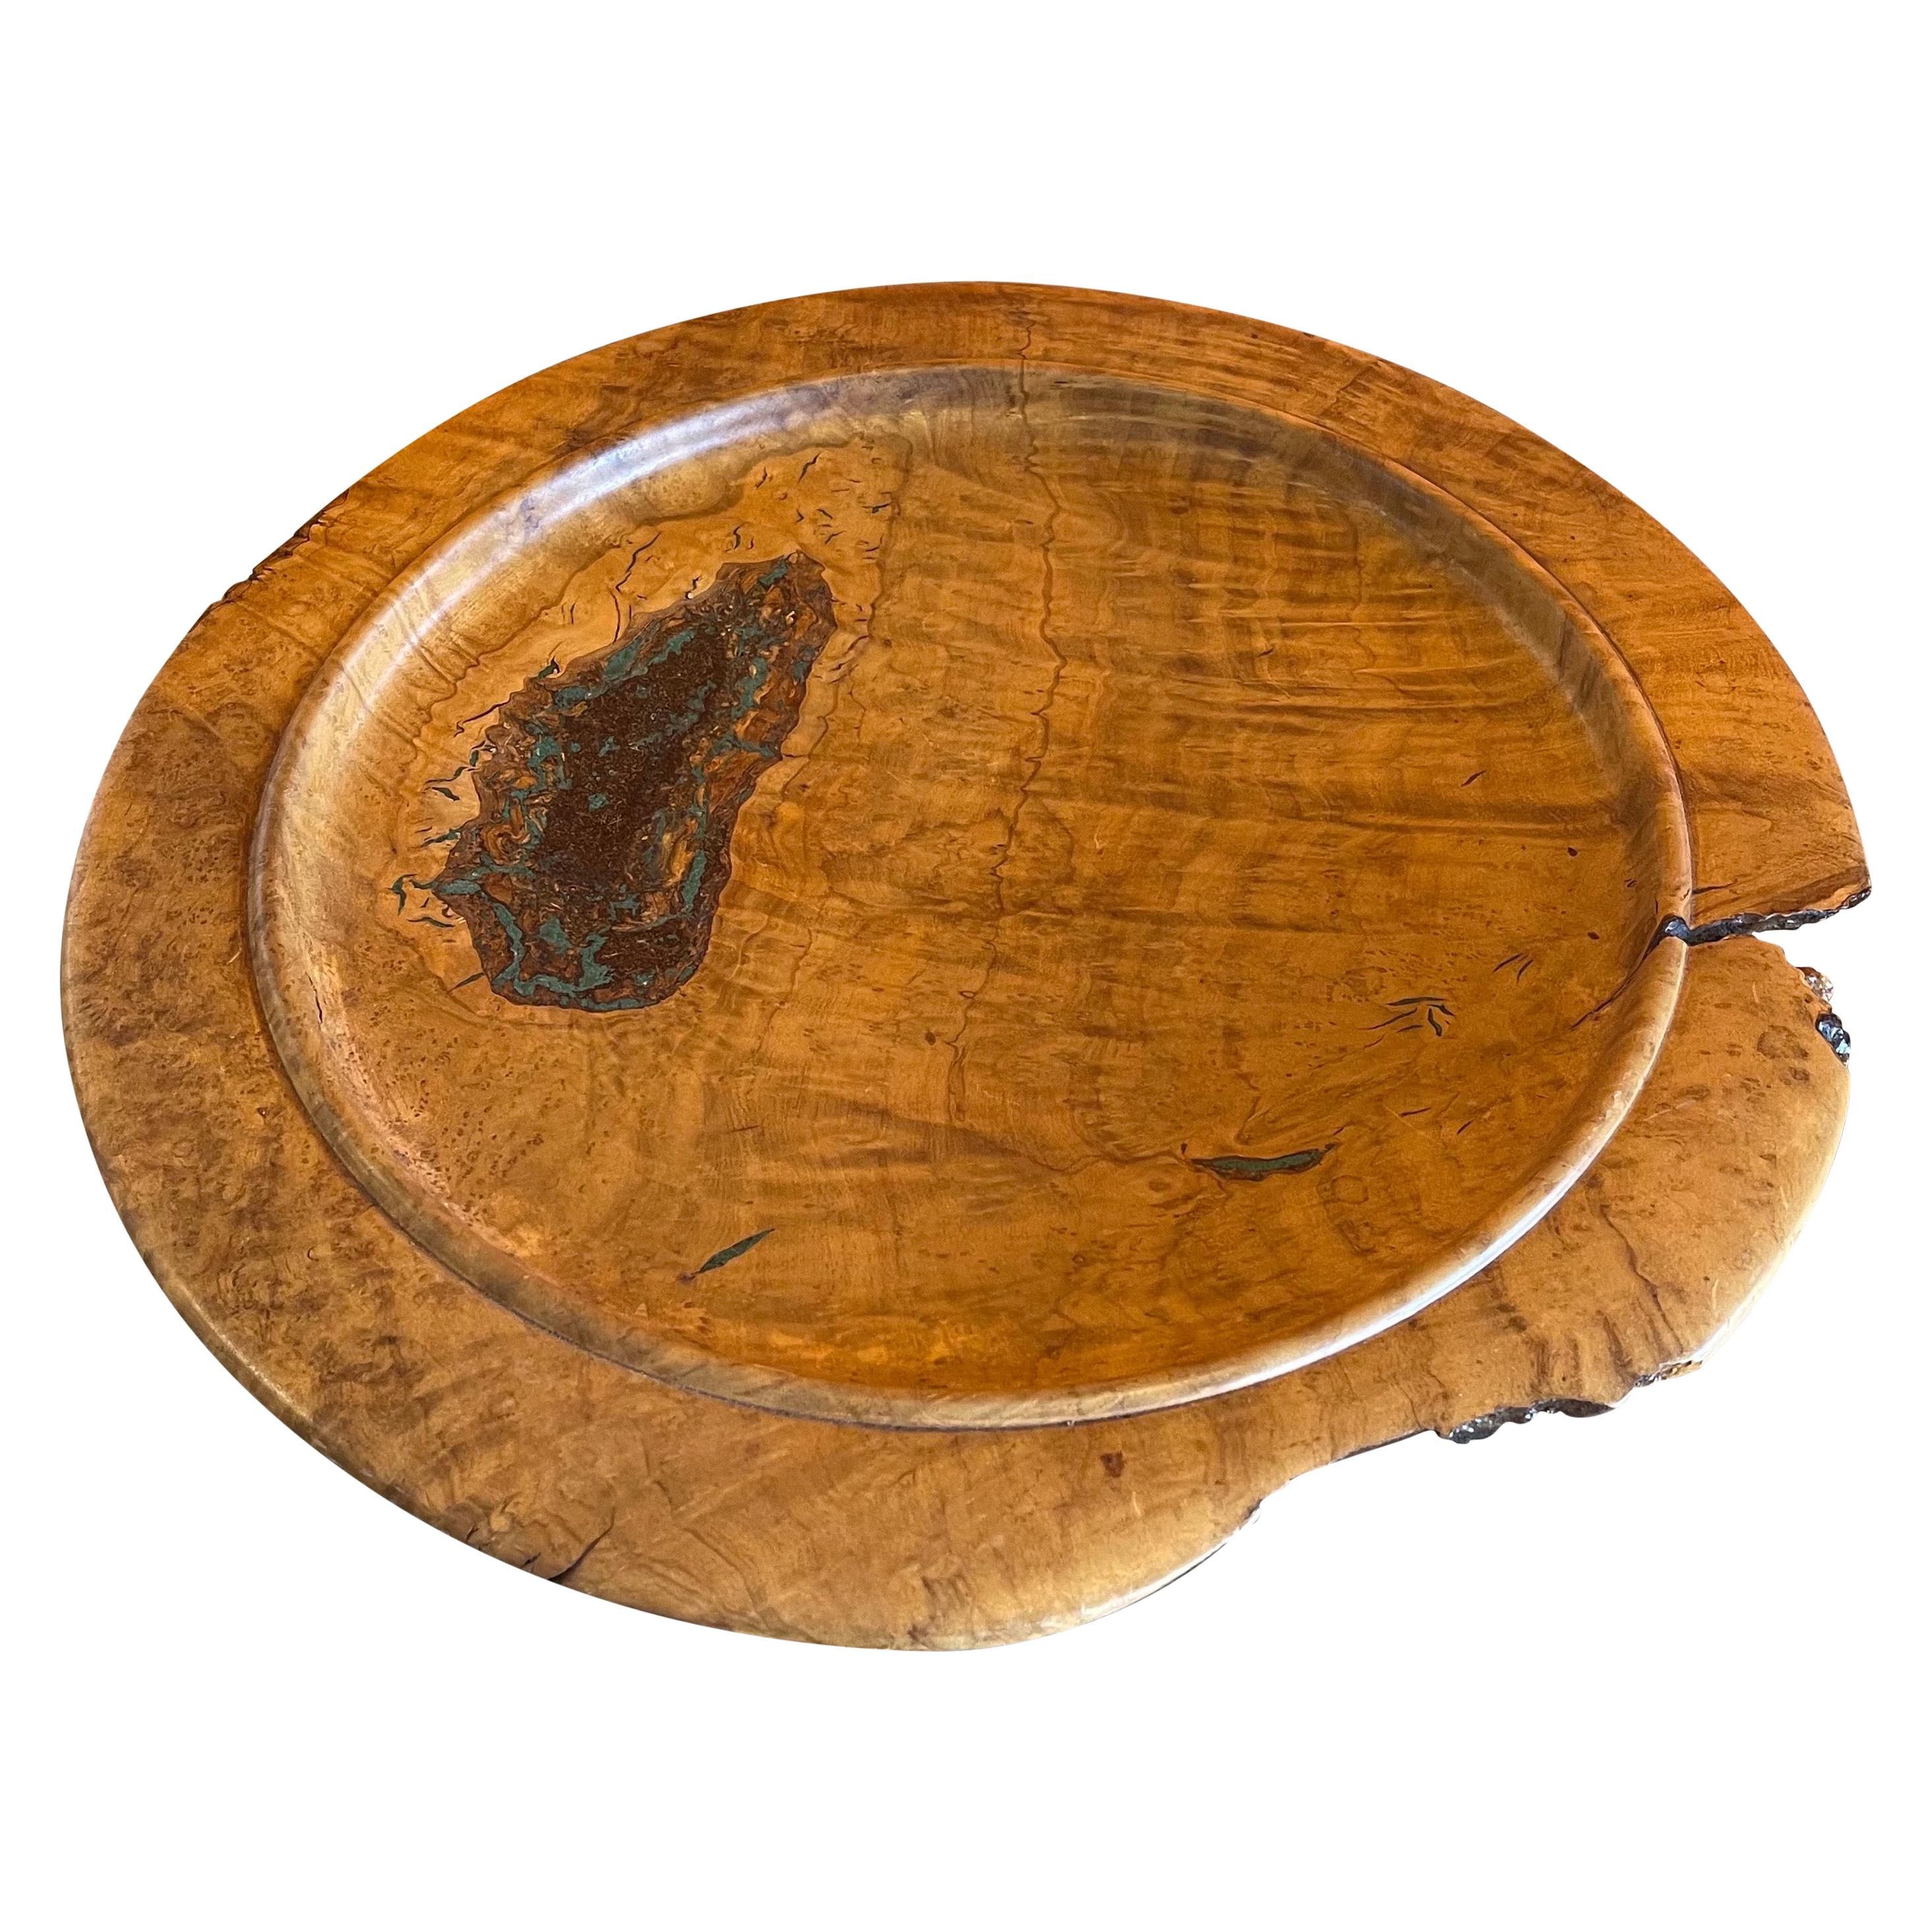 "Map of Mars" Serving Tray or Platter in Olive Burlwood by Richard Sherry For Sale